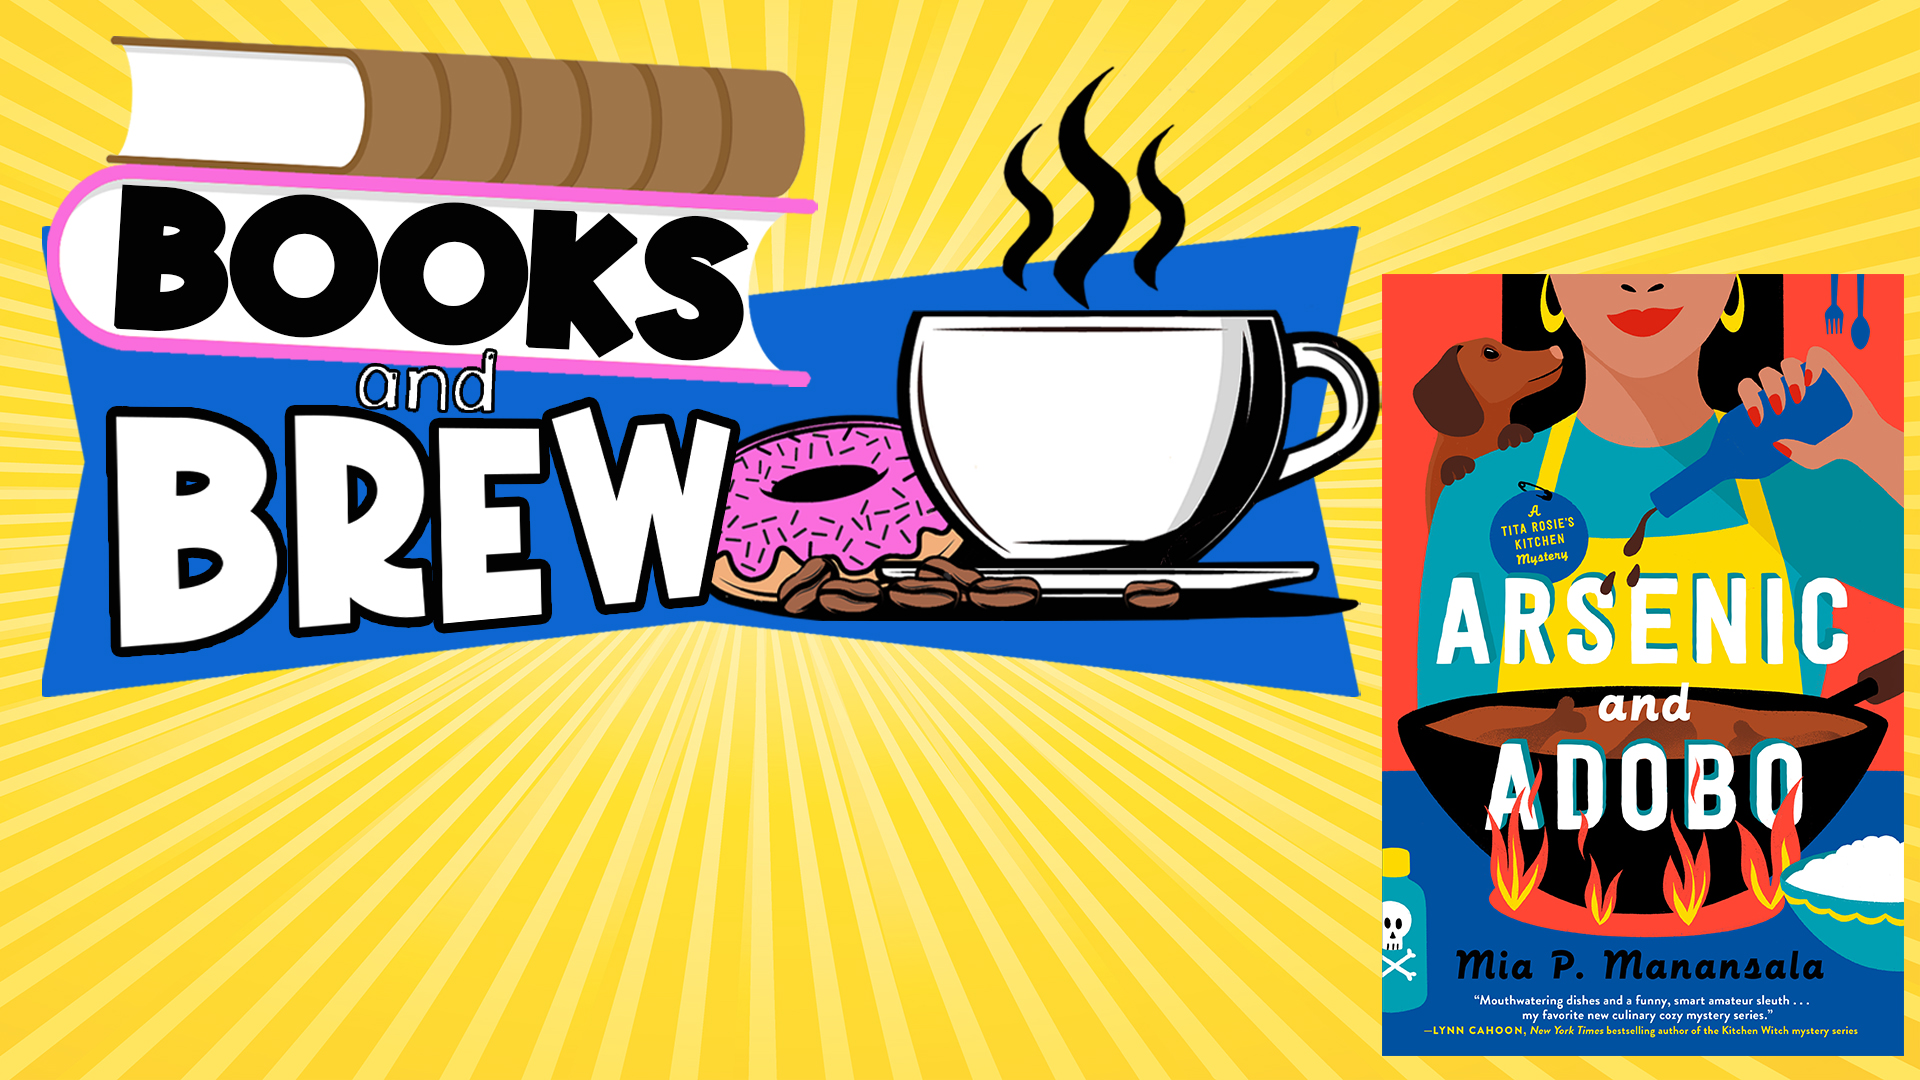 Image reads "Books and Brew" against a blue banner and stack of books. To the right of the words are some coffee beans, a coffee cup, and a donut. There is a yellow sunburst background. The book cover for "Arsenic and Adobo" by Mia P. Manansala takes up the right side of the image.